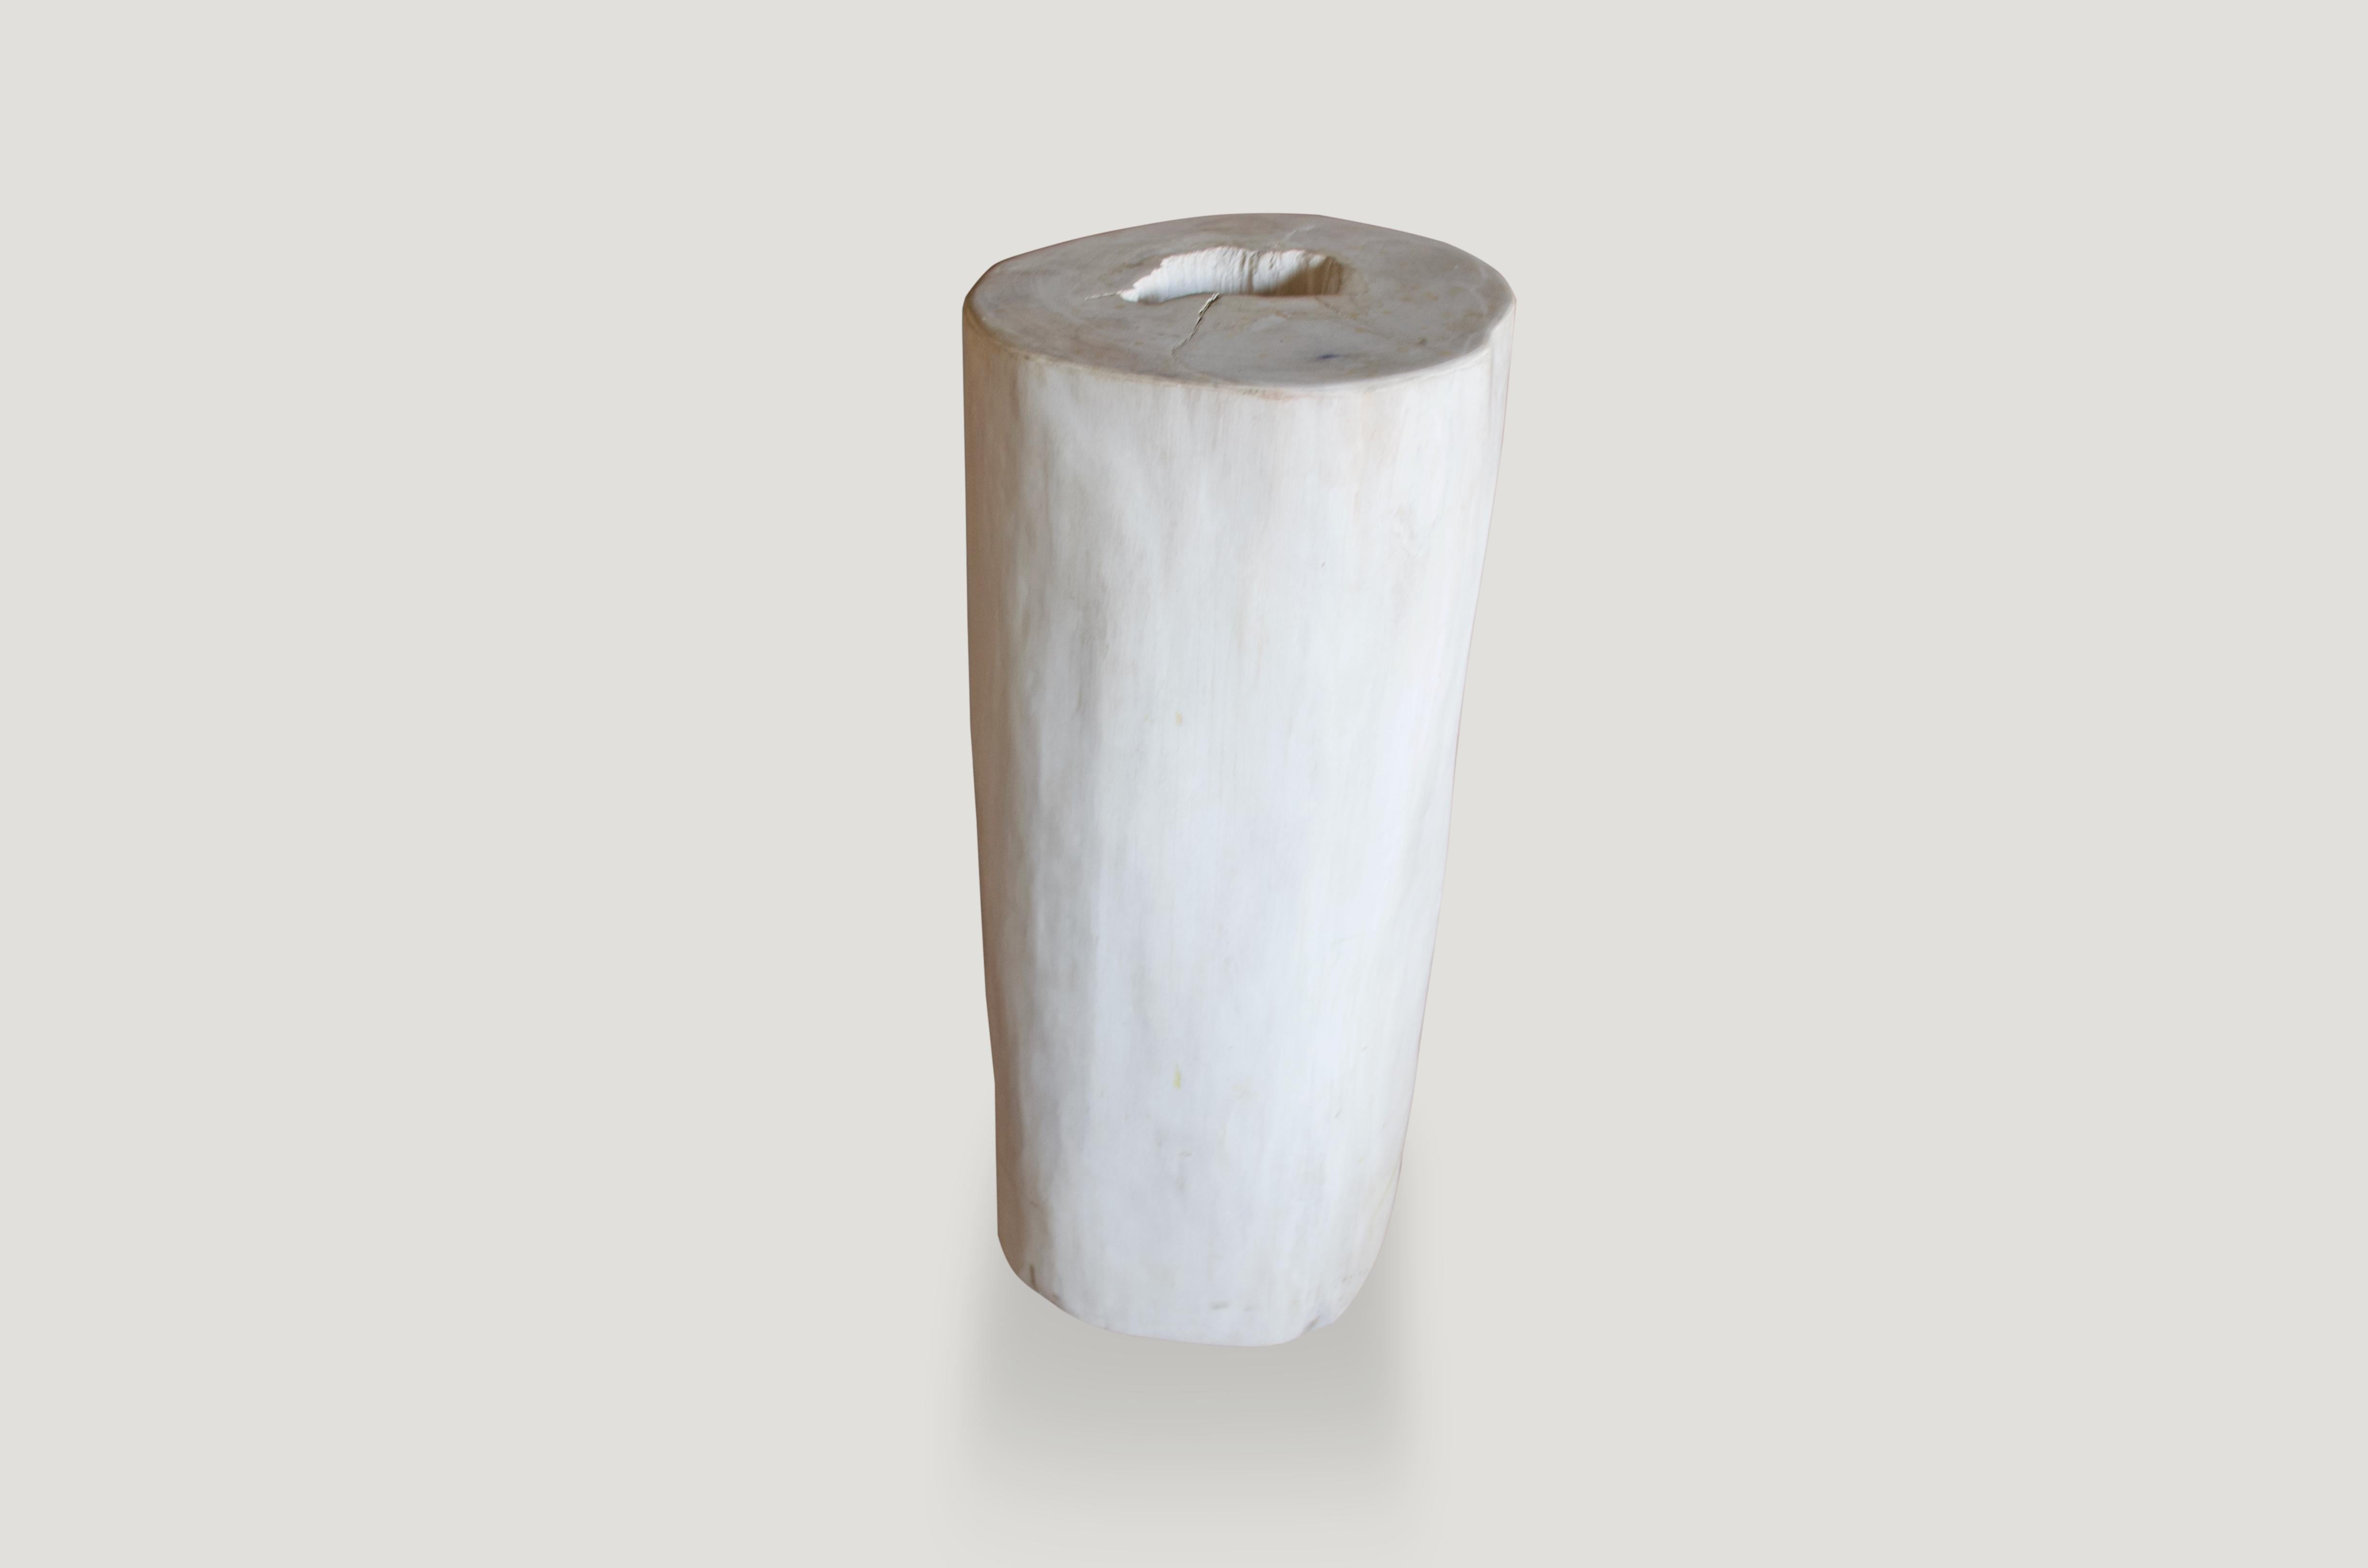 Andrianna Shamaris Super Smooth White Petrified Wood Side Table In Excellent Condition For Sale In New York, NY